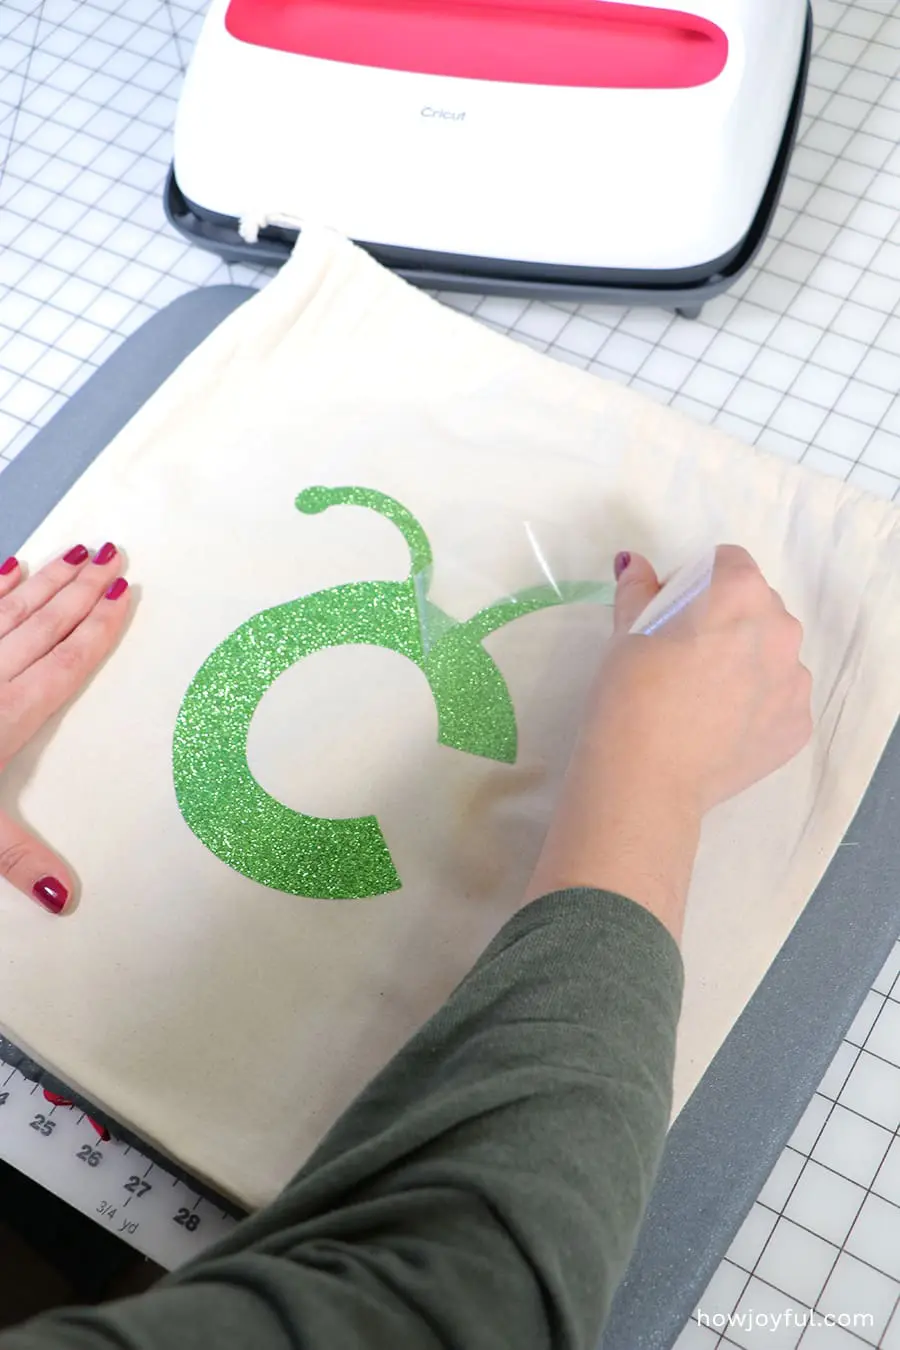 What do I need to get started with Cricut?